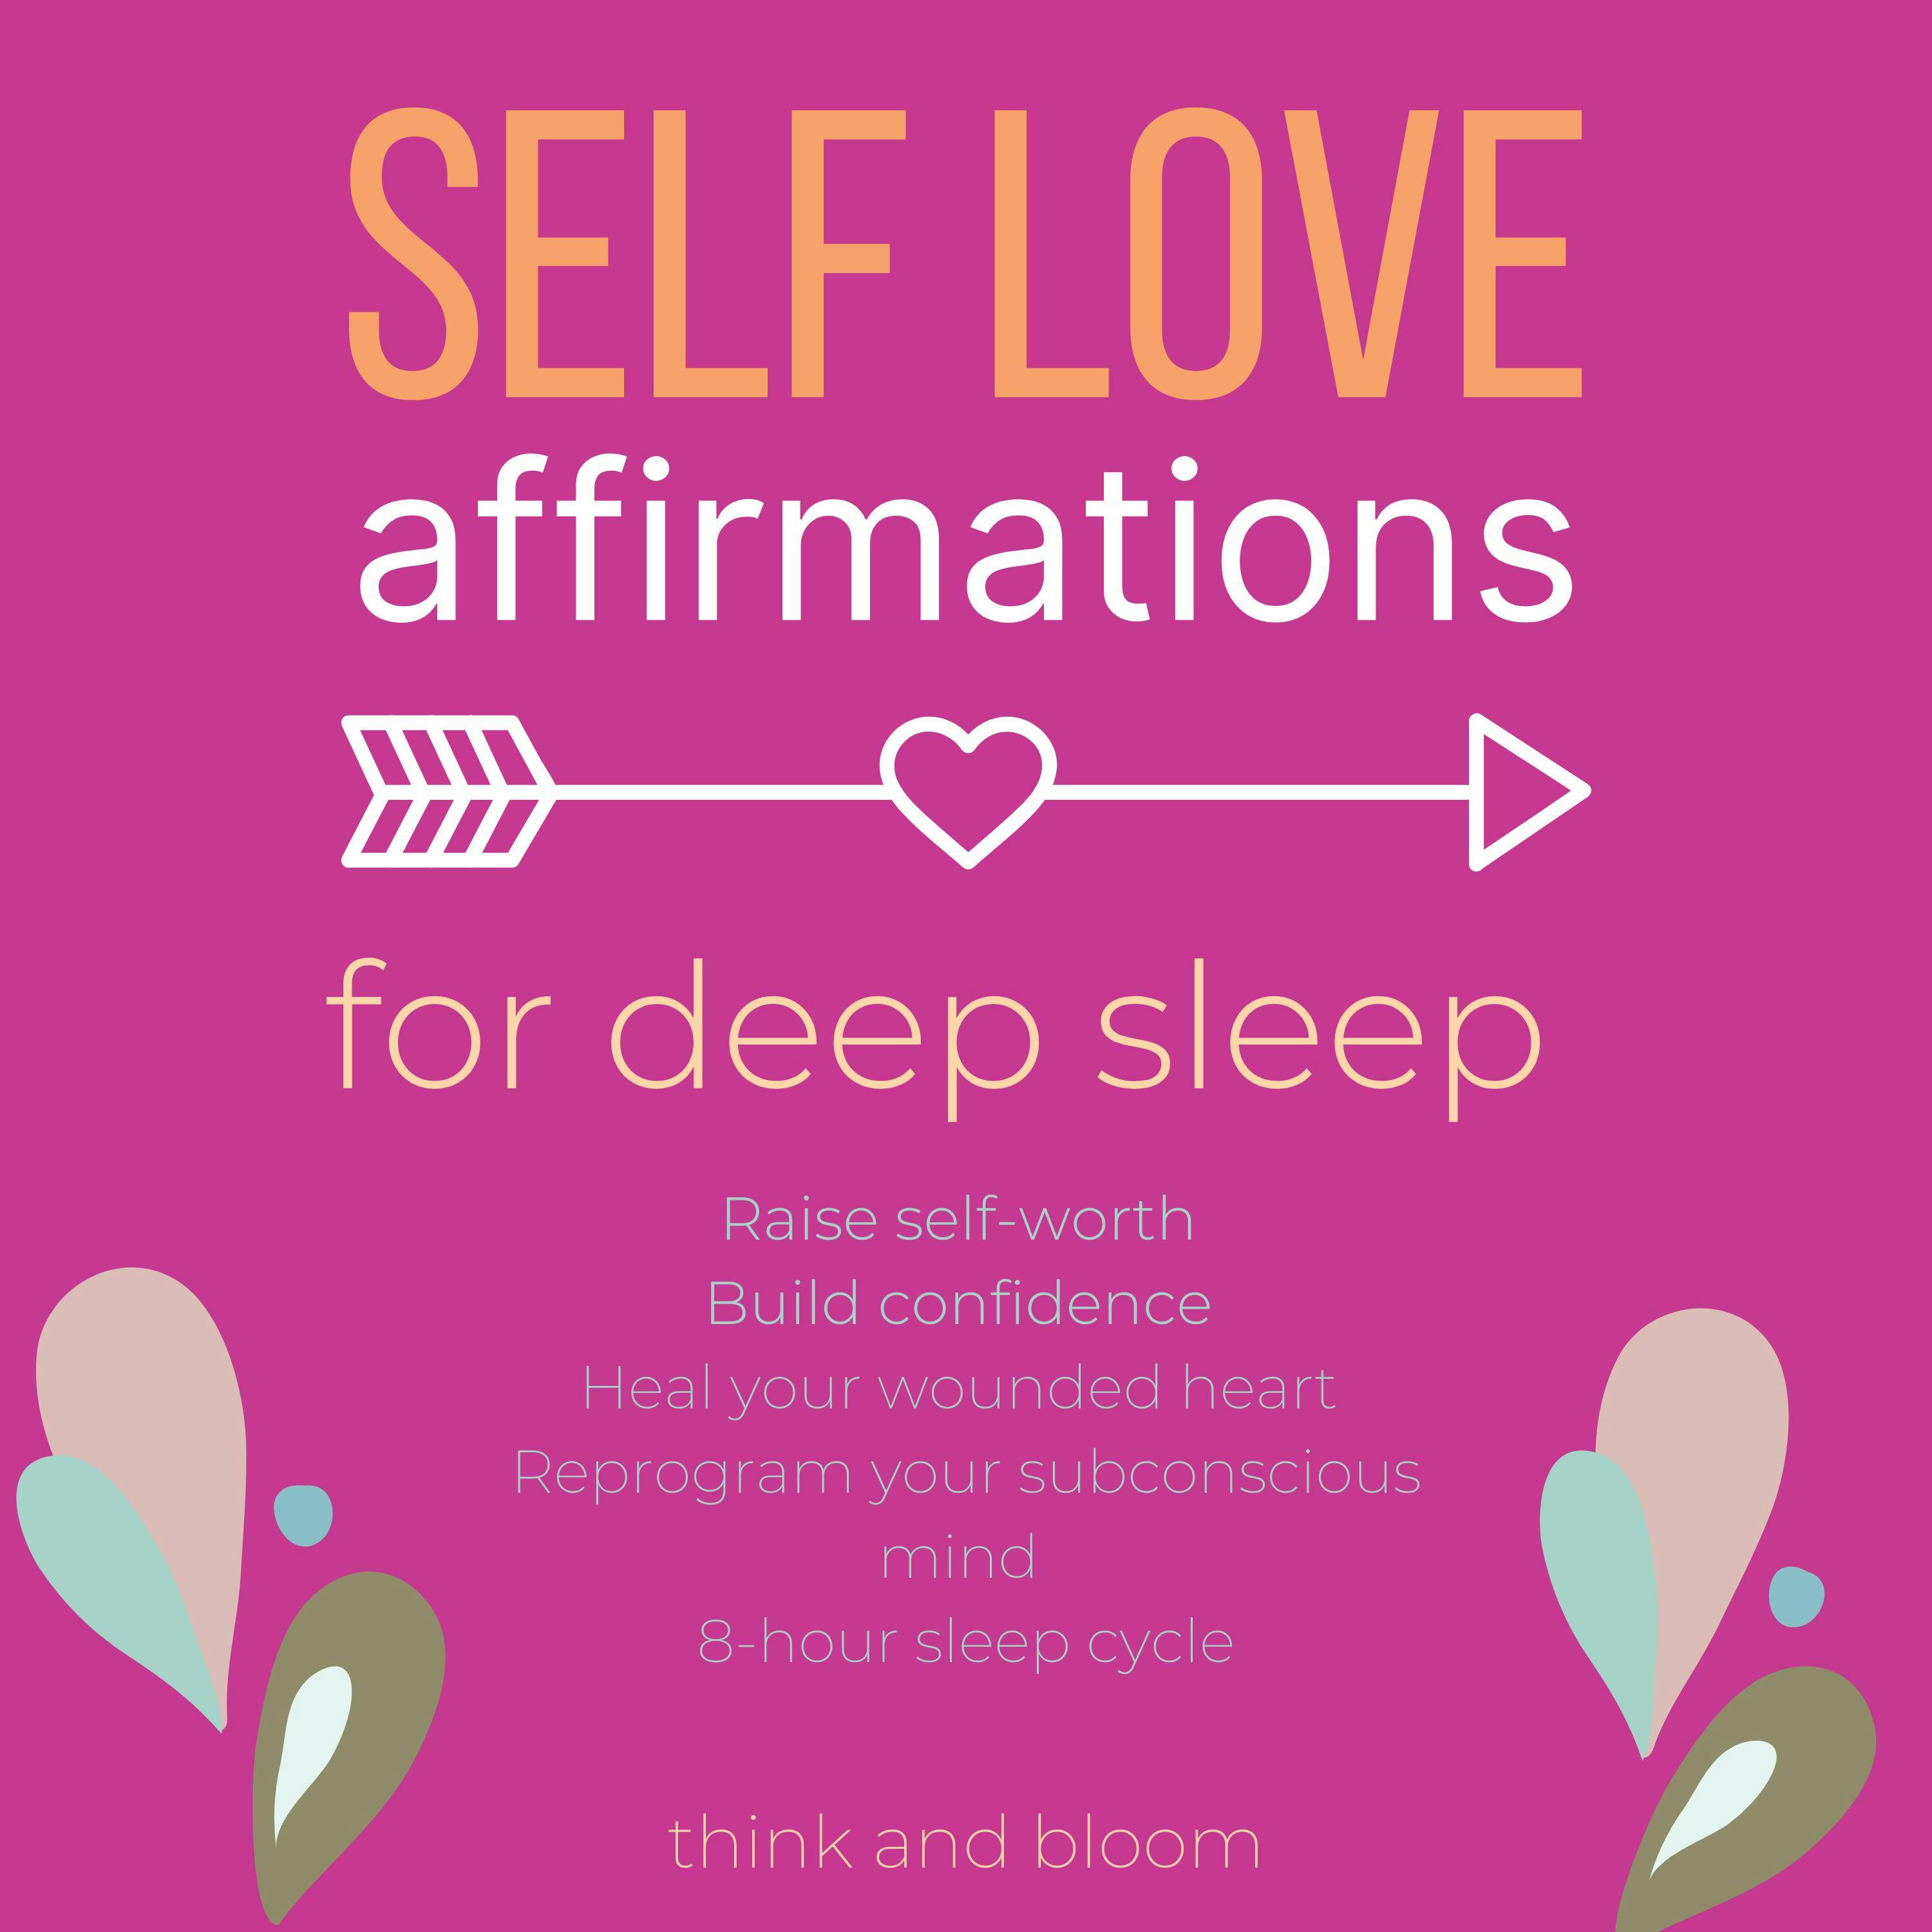 Self-Love Affirmations For Deep Sleep: Raise self-worth Build confidence, Heal your wounded heart, Reprogram your subconscious mind, 8-hour sleep cycle - undefined